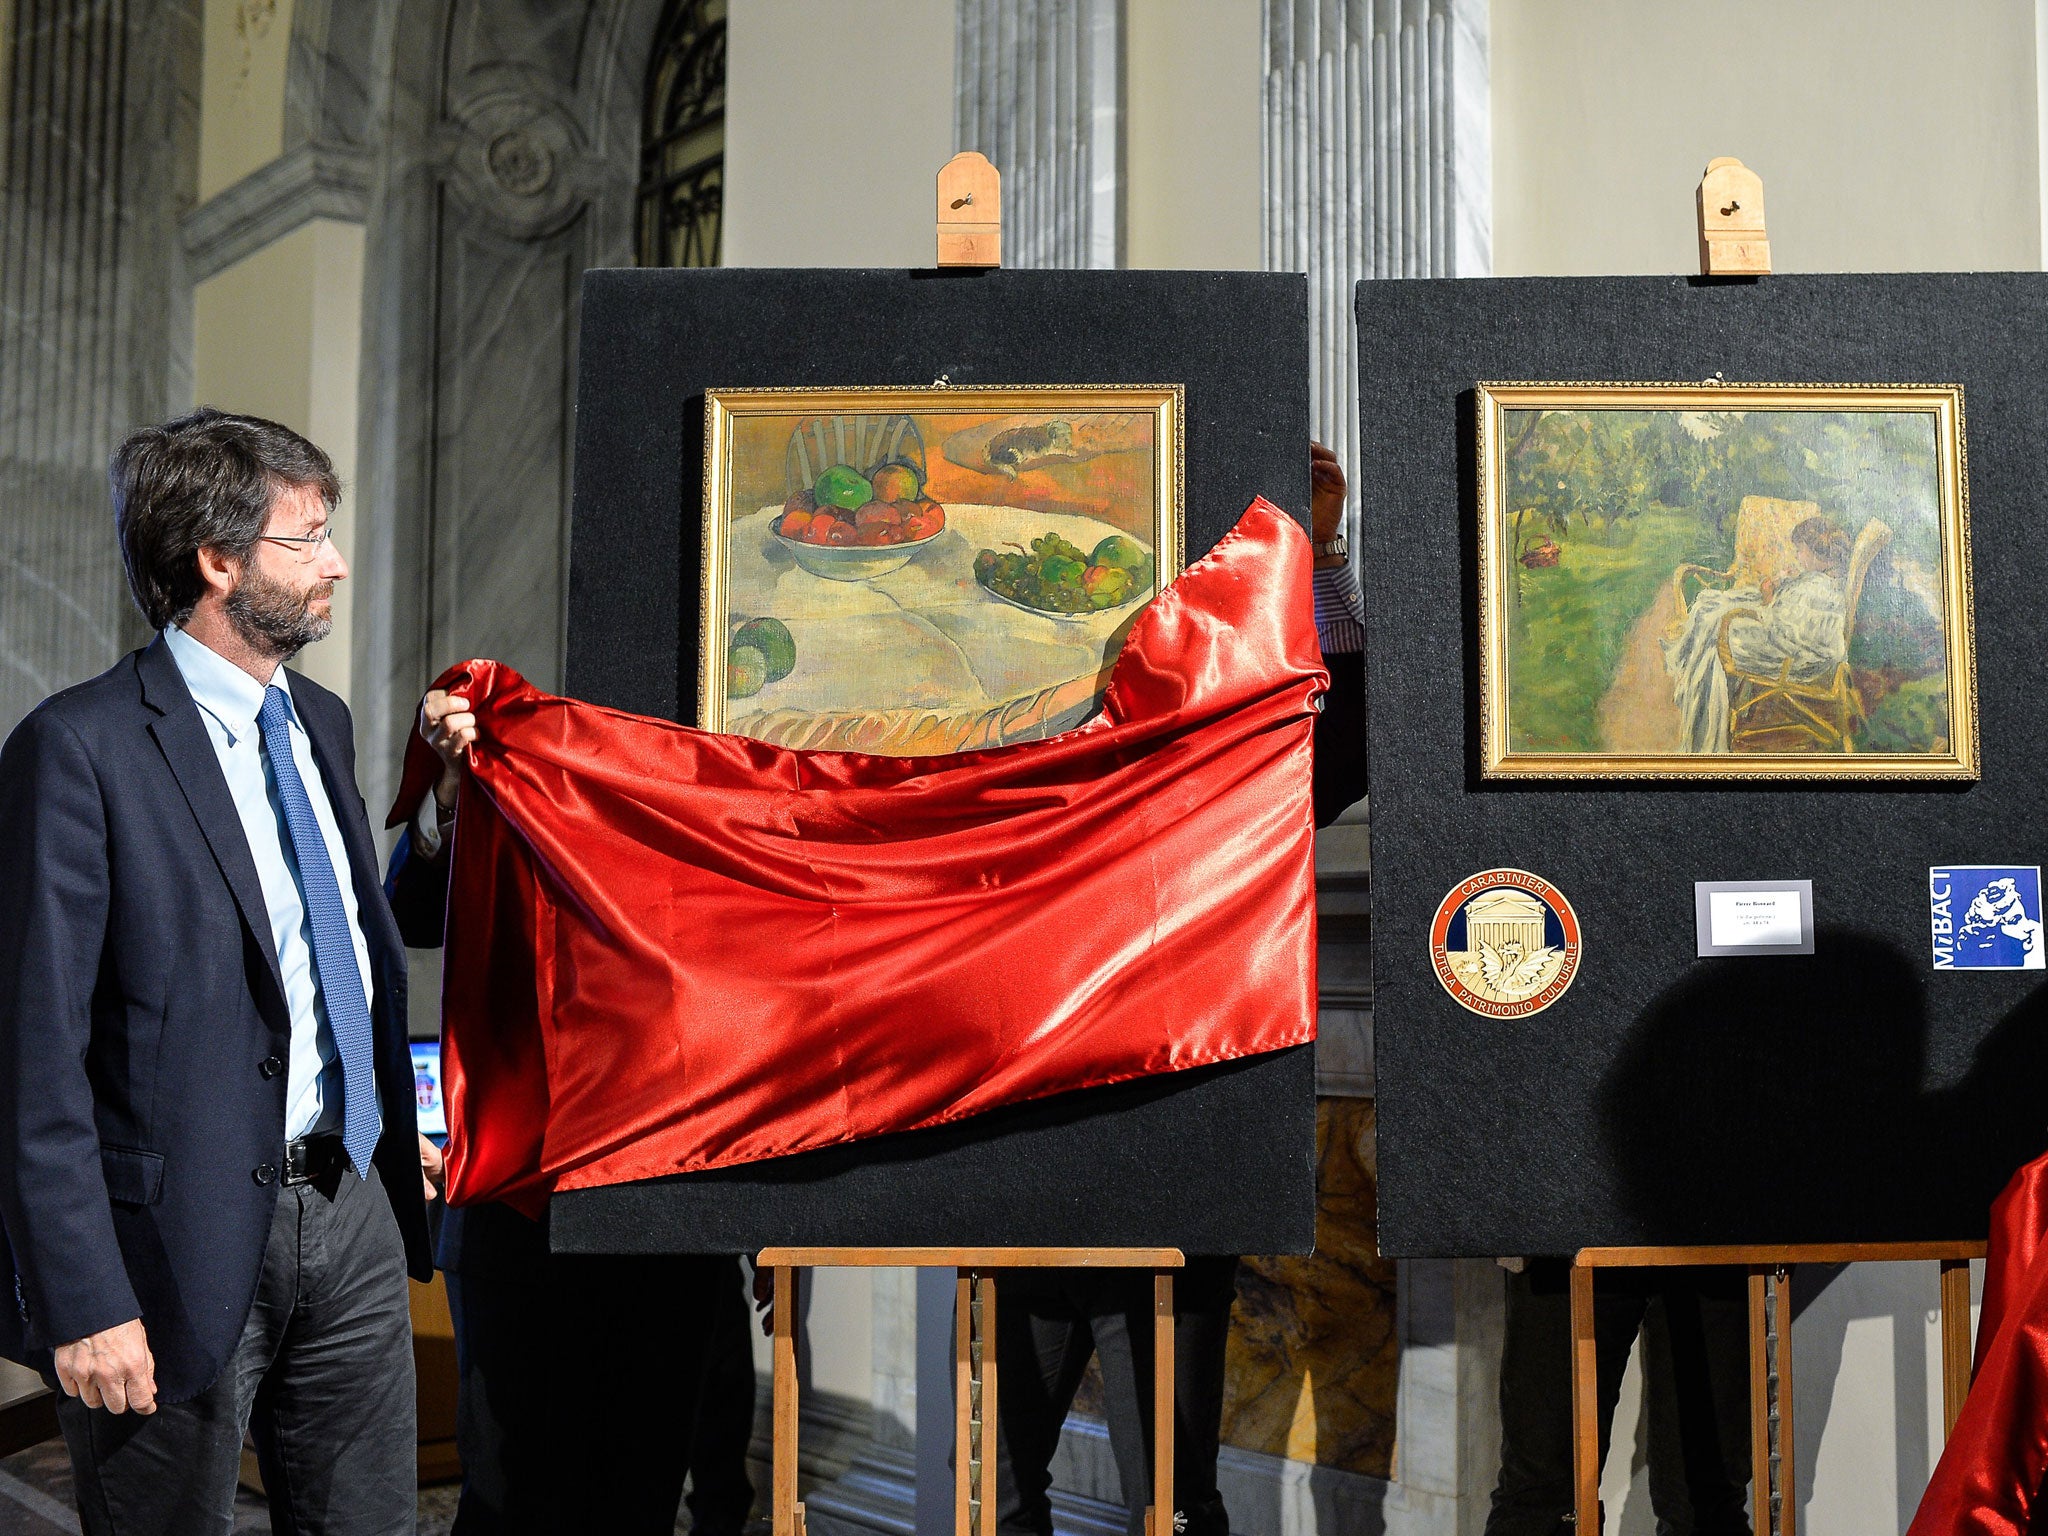 Italian minister of culture Dario Franceschini and General of Carabinieri Mariano Mossa unveil the two paintings stolen in London in the 1970s by French artists Paul Gauguin (left) and Pierre Bonnard (right)